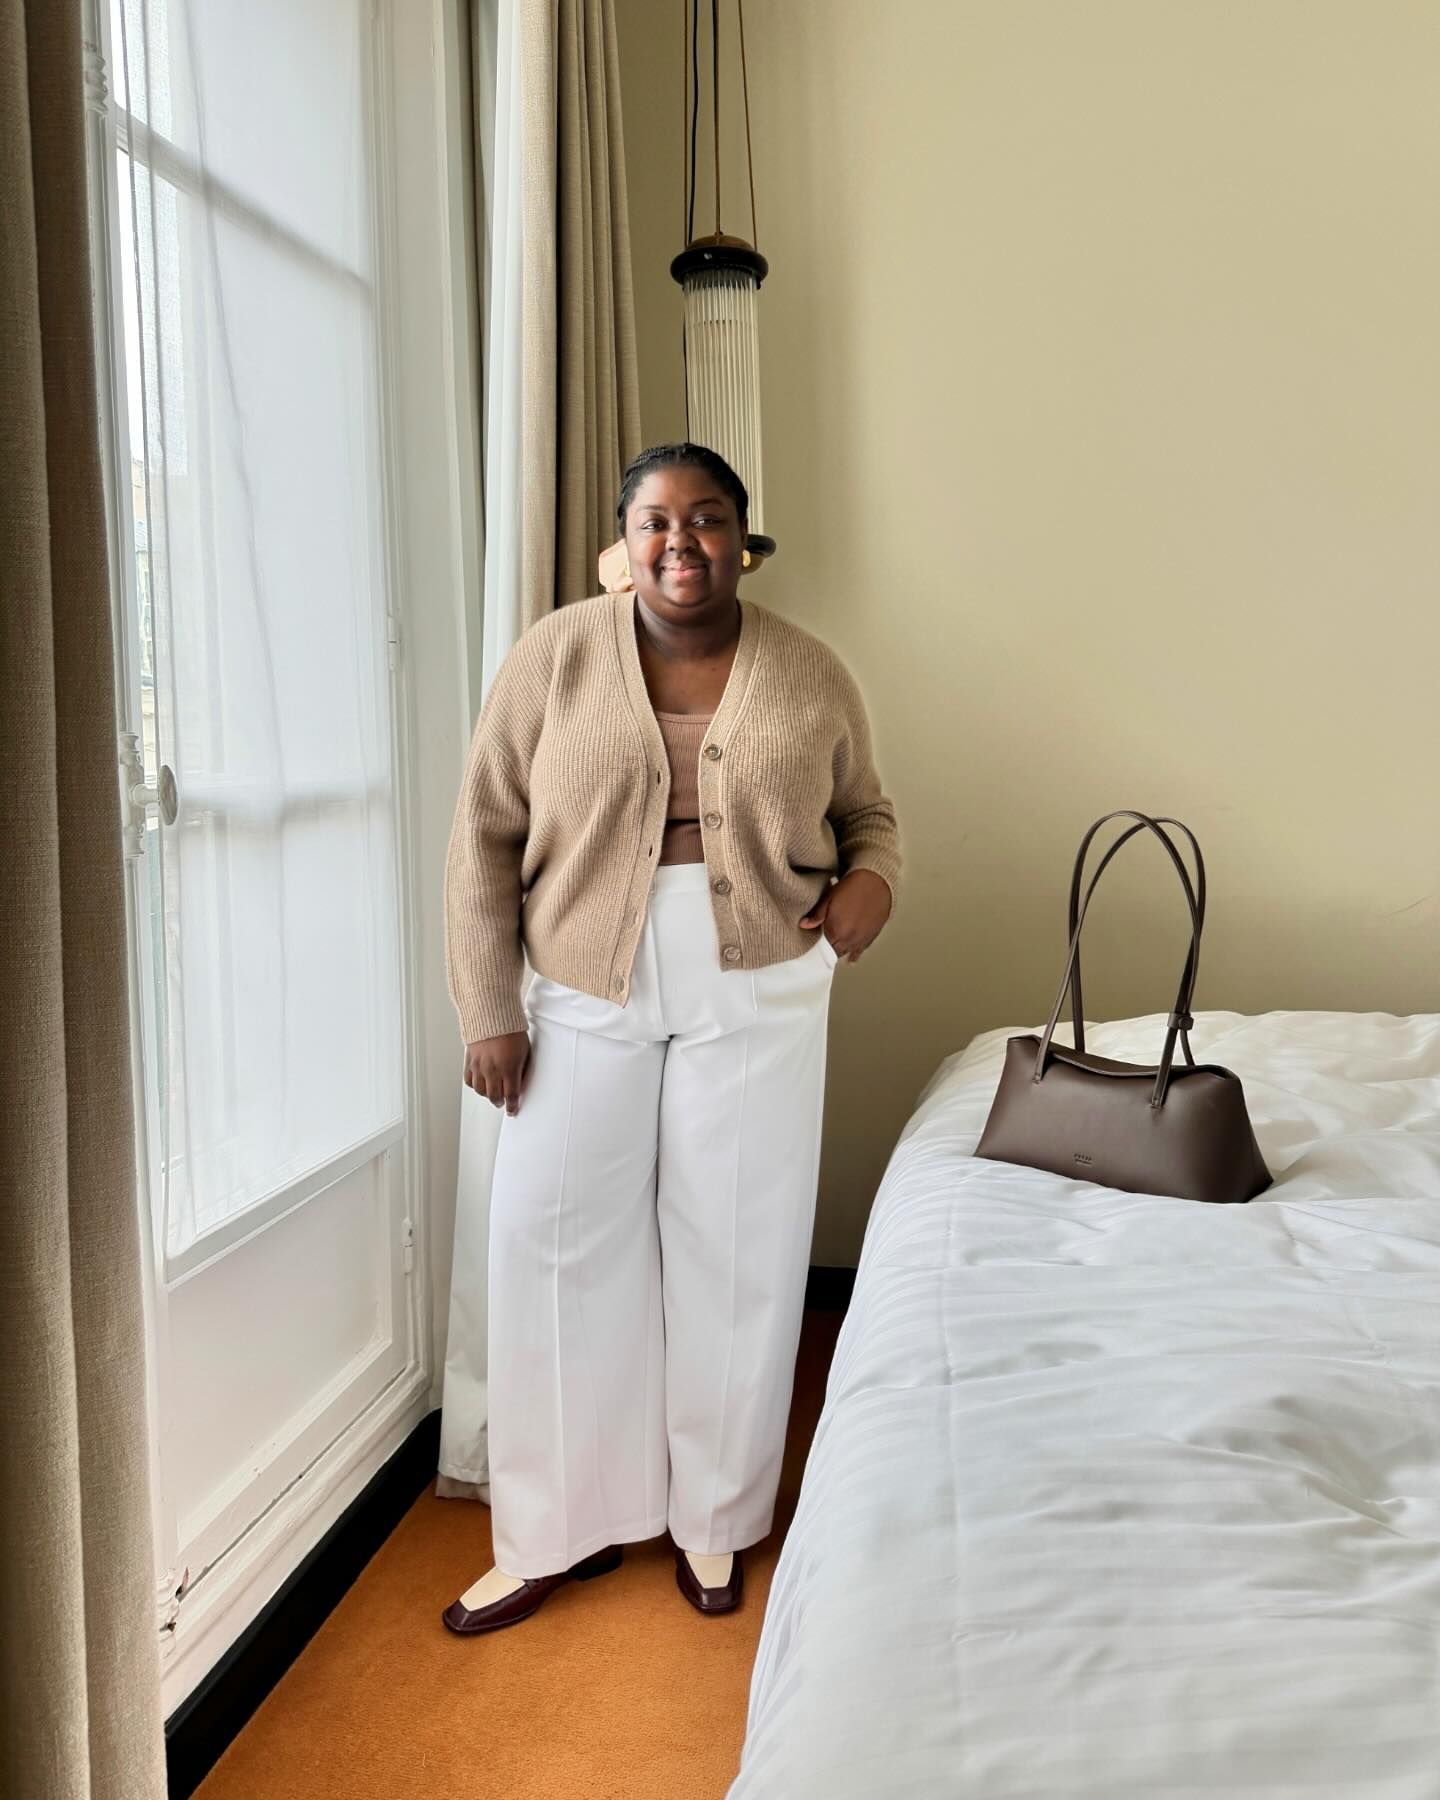 British plus size influencer Abisola Omole poses in a modern bedroom wearing a neutral outfit with a tan cardigan, camel top, white pants, brown minimalistic bag, and two-tone loafers